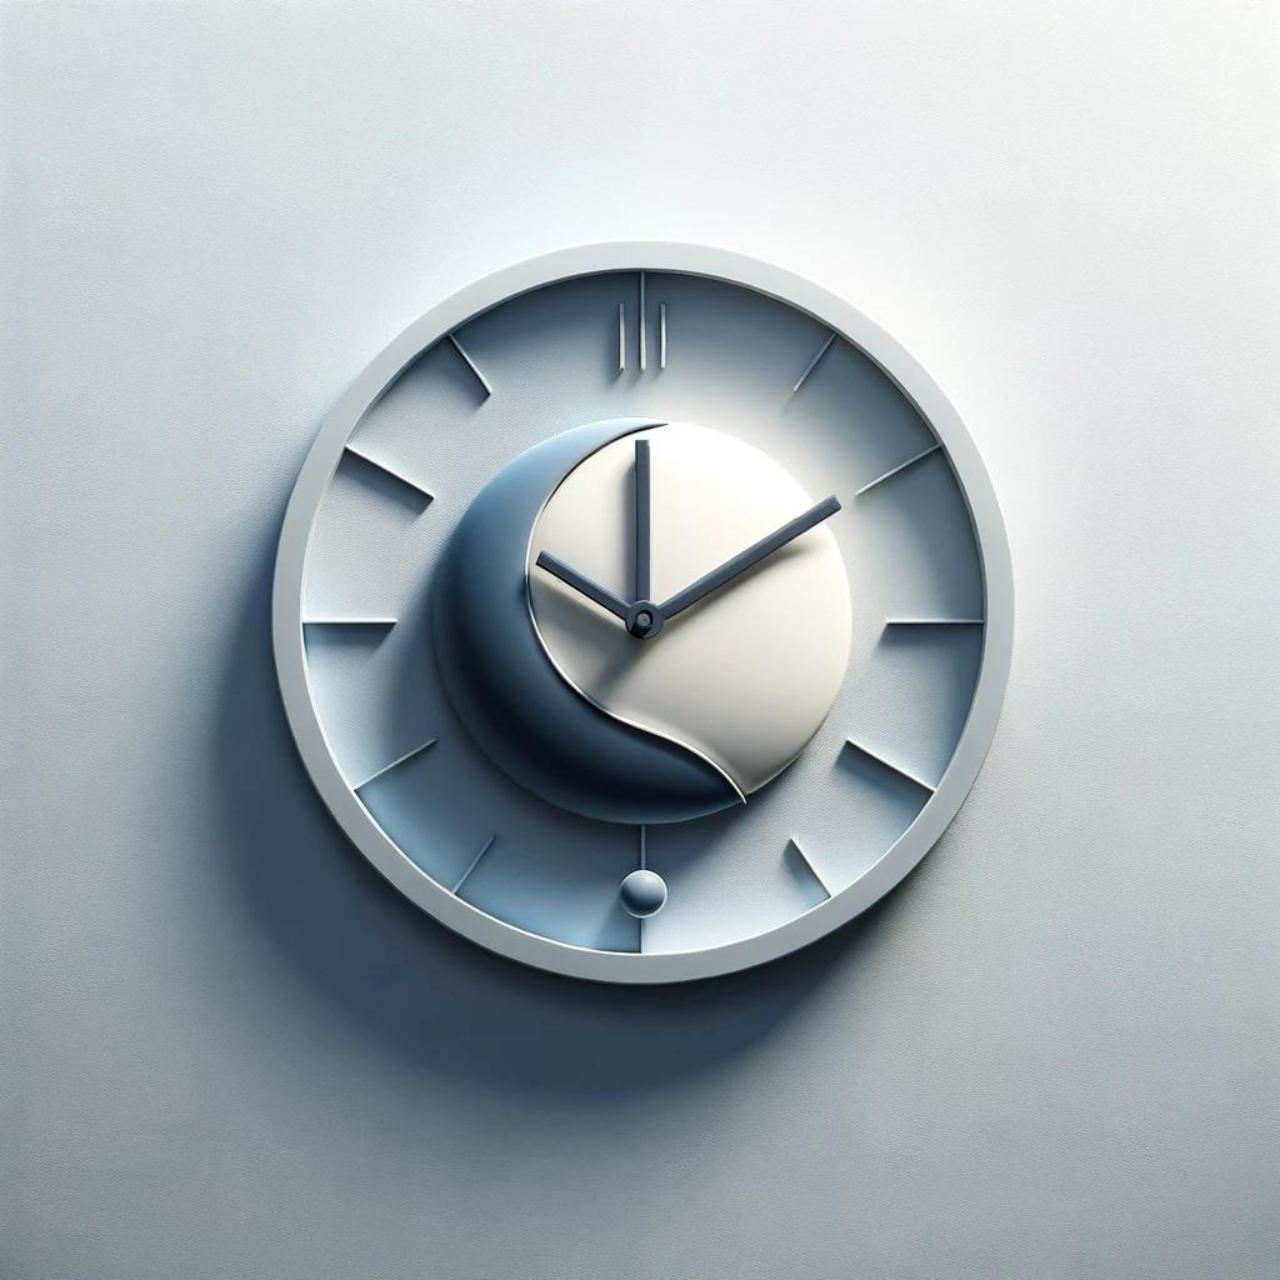 A sleek, simple clock symbolizing the passage of time and mindfulness mentioned in these one day at a time quotes.